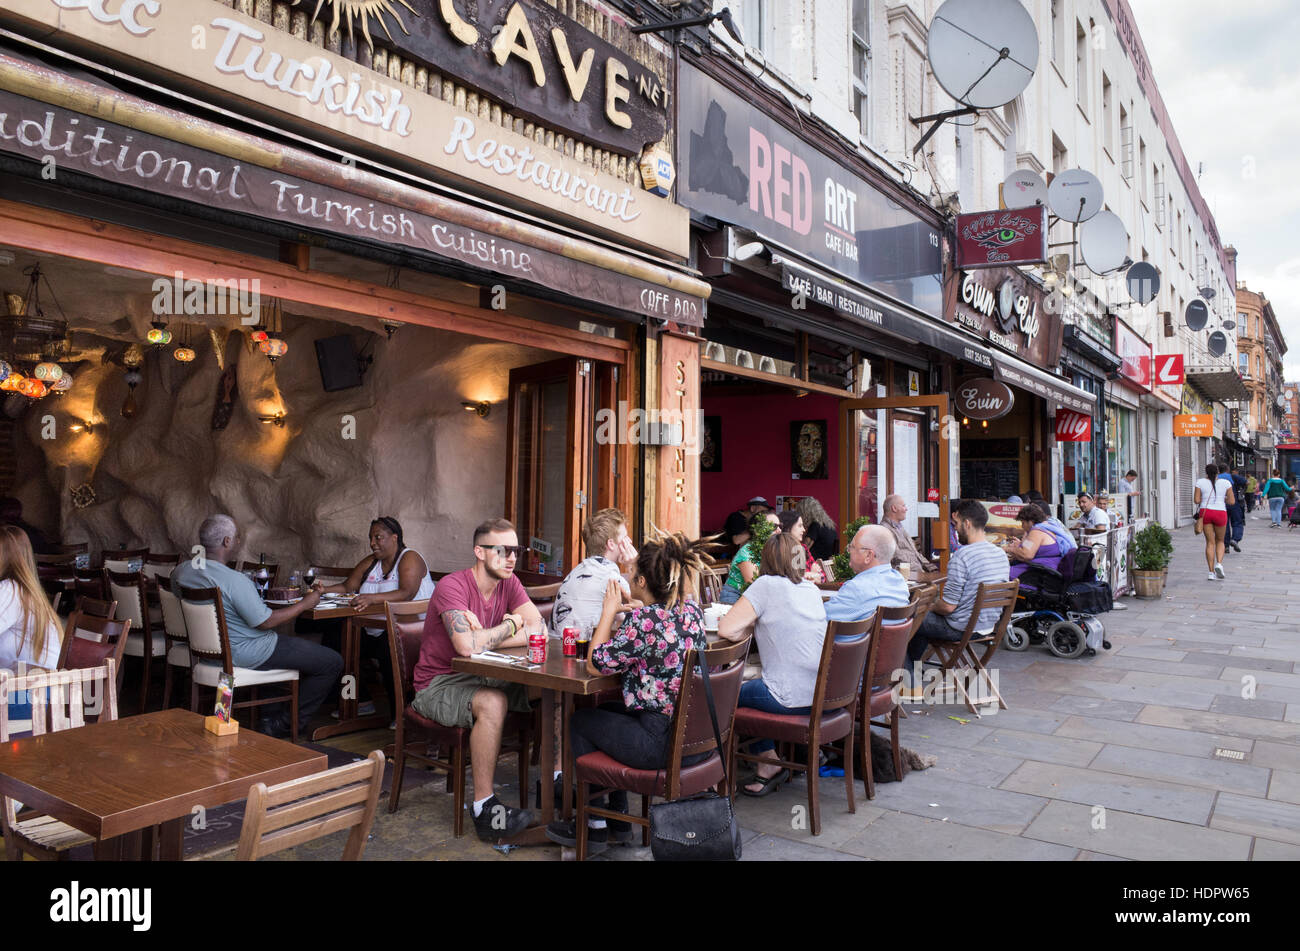 People sitting at outdoor tables of cafes and restaurants on Kingsland High Street, Dalston, Hackney, London, England, UK Stock Photo